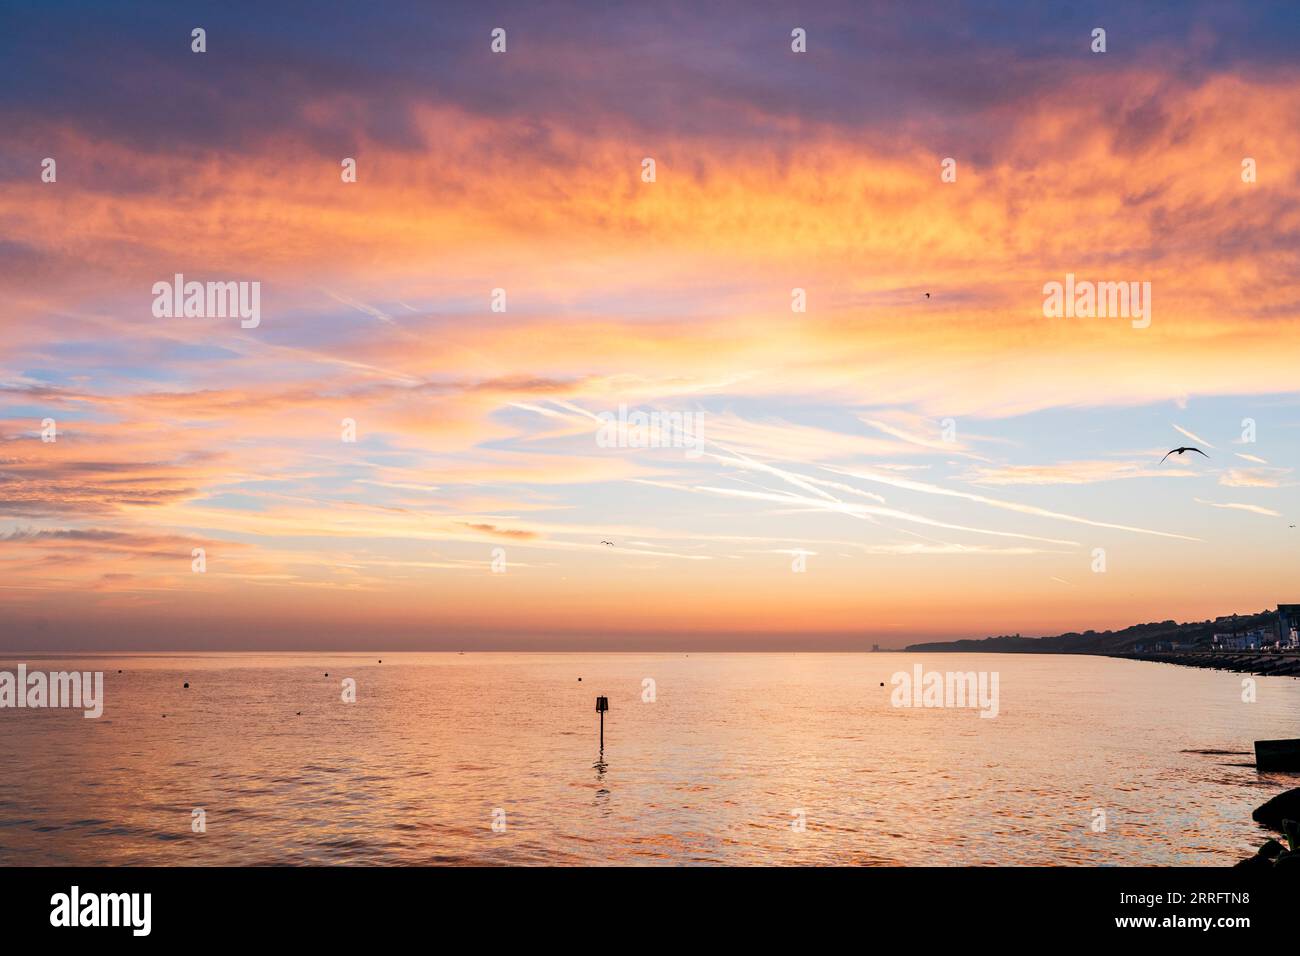 The dawn sky over the sea at Herne Bay on the North Kent coast. Orange and yellow clouds against a blue sky with a band of orange on the horizon. The clam seea reflecting he orange colour. Stock Photo